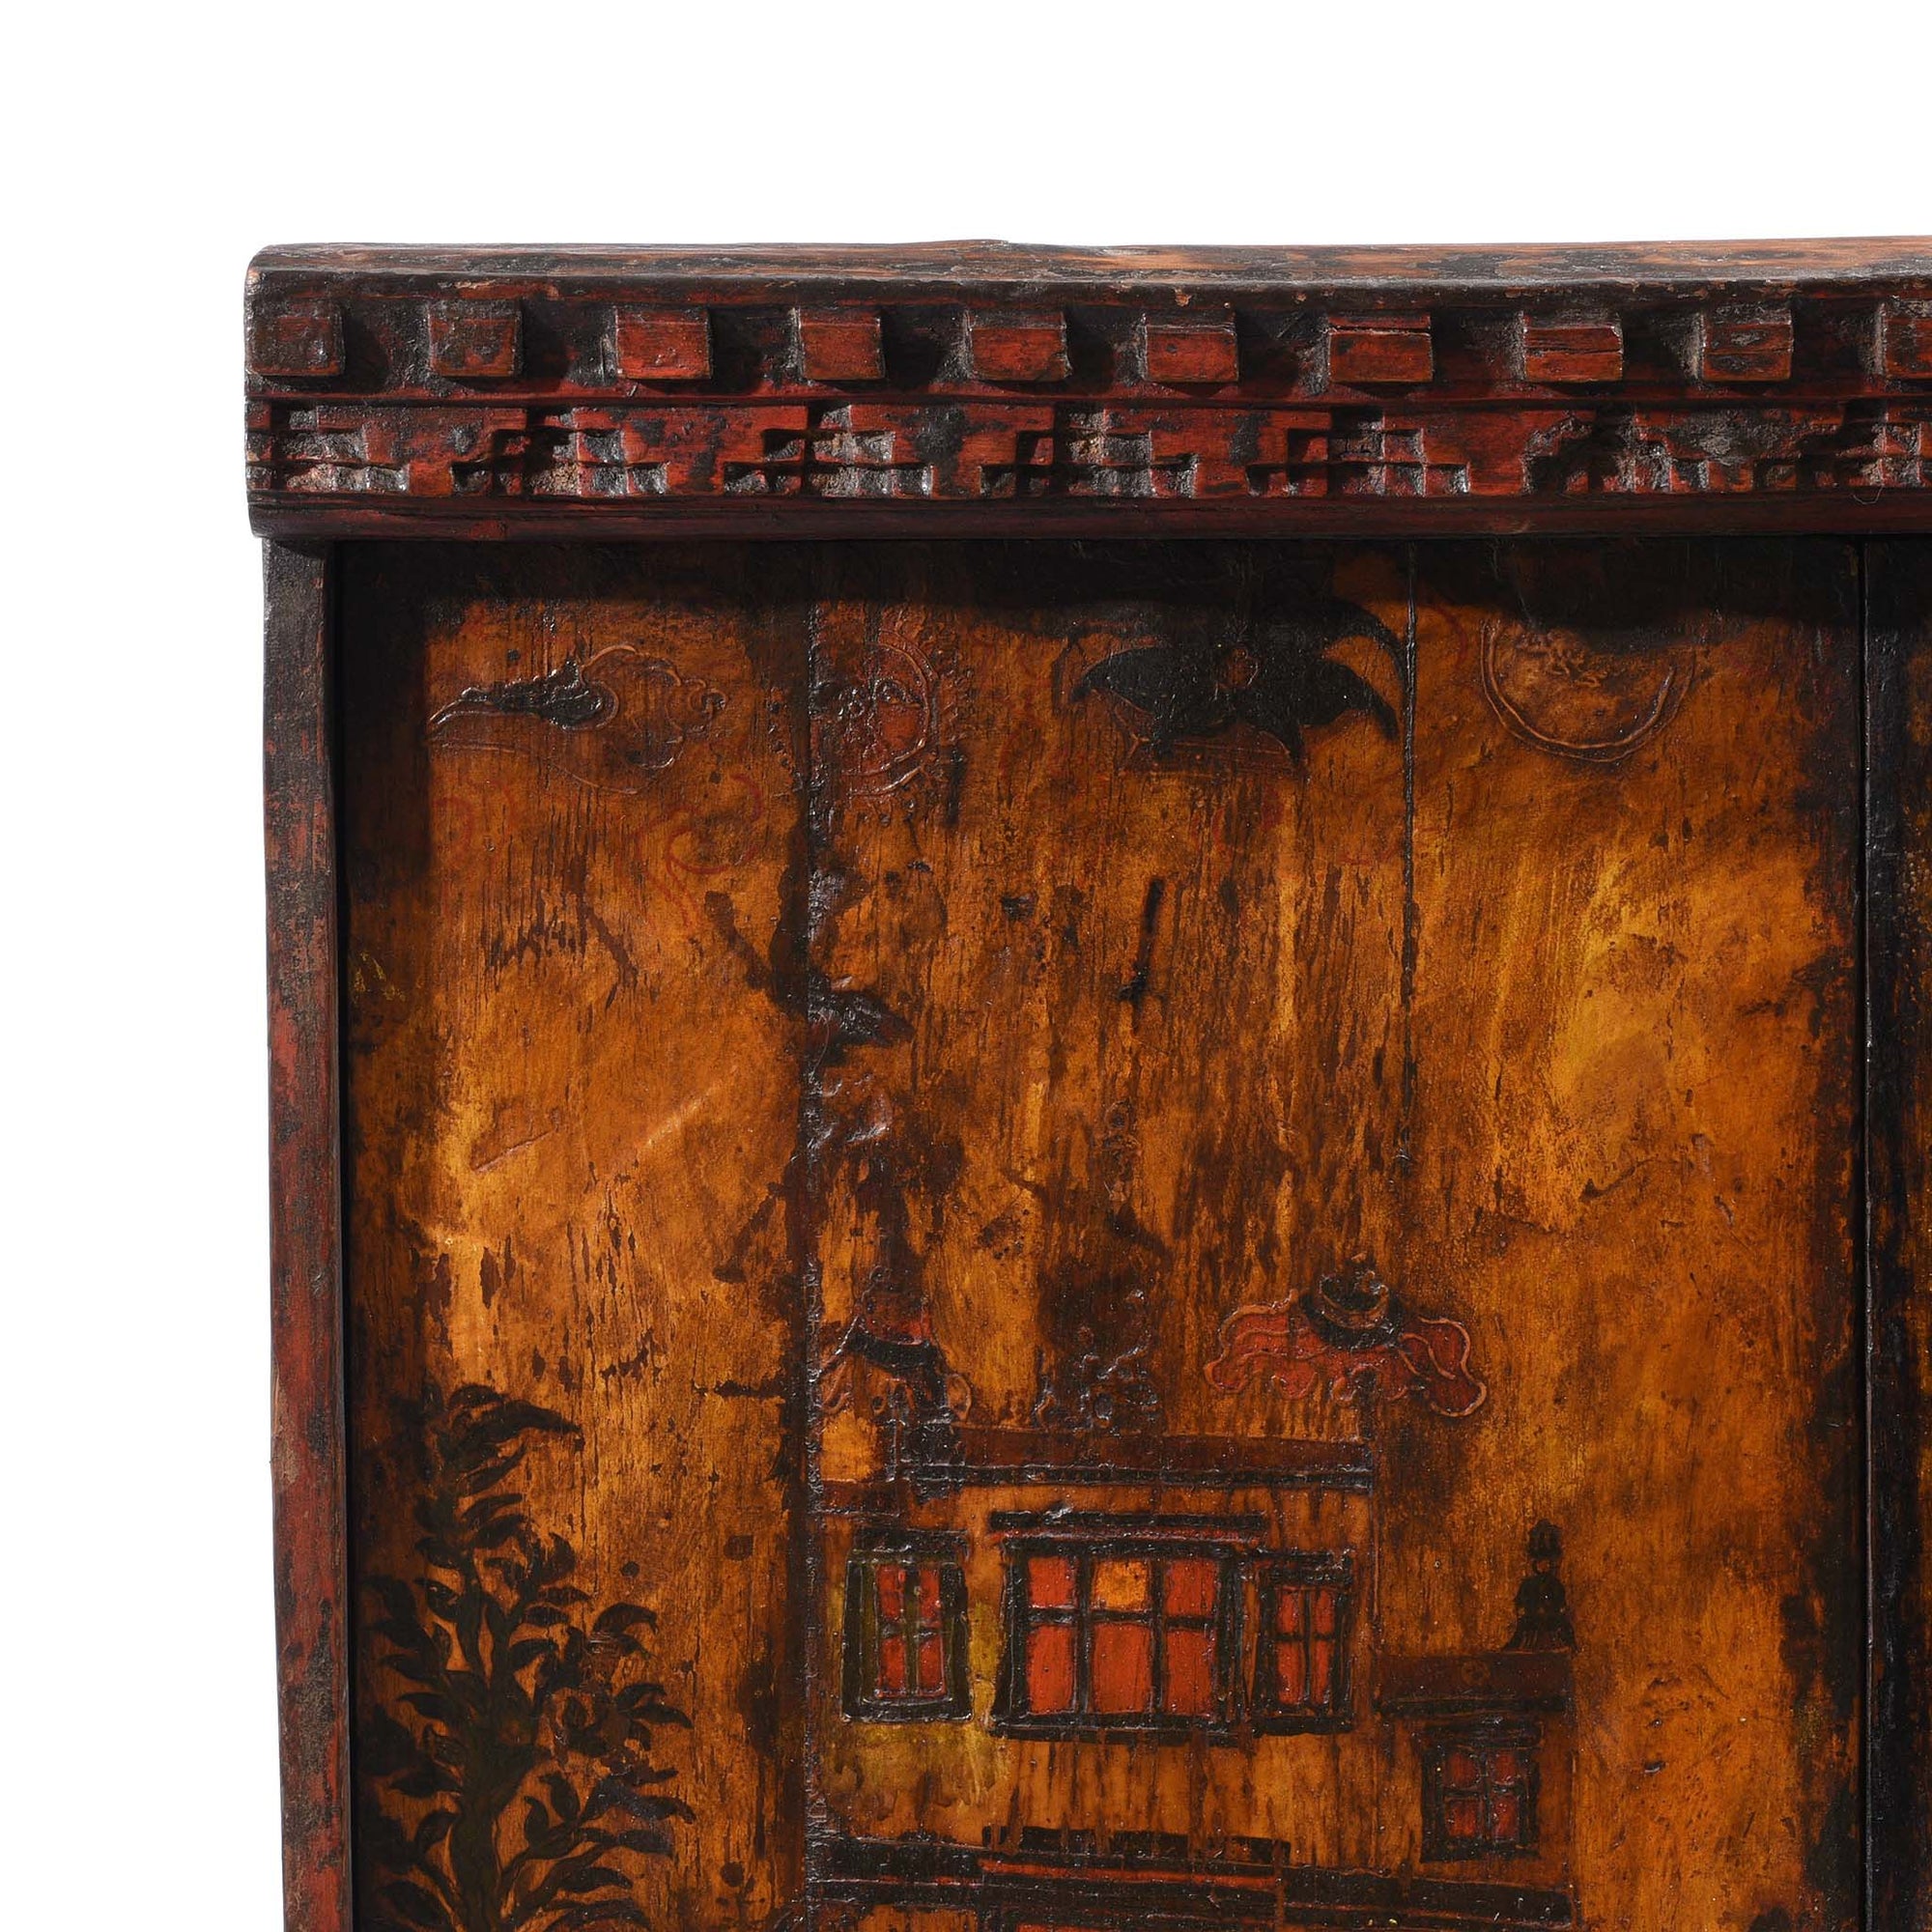 Two Tone Painted Torkham Cabinet From Tibet - 18thC | Indigo Antiques